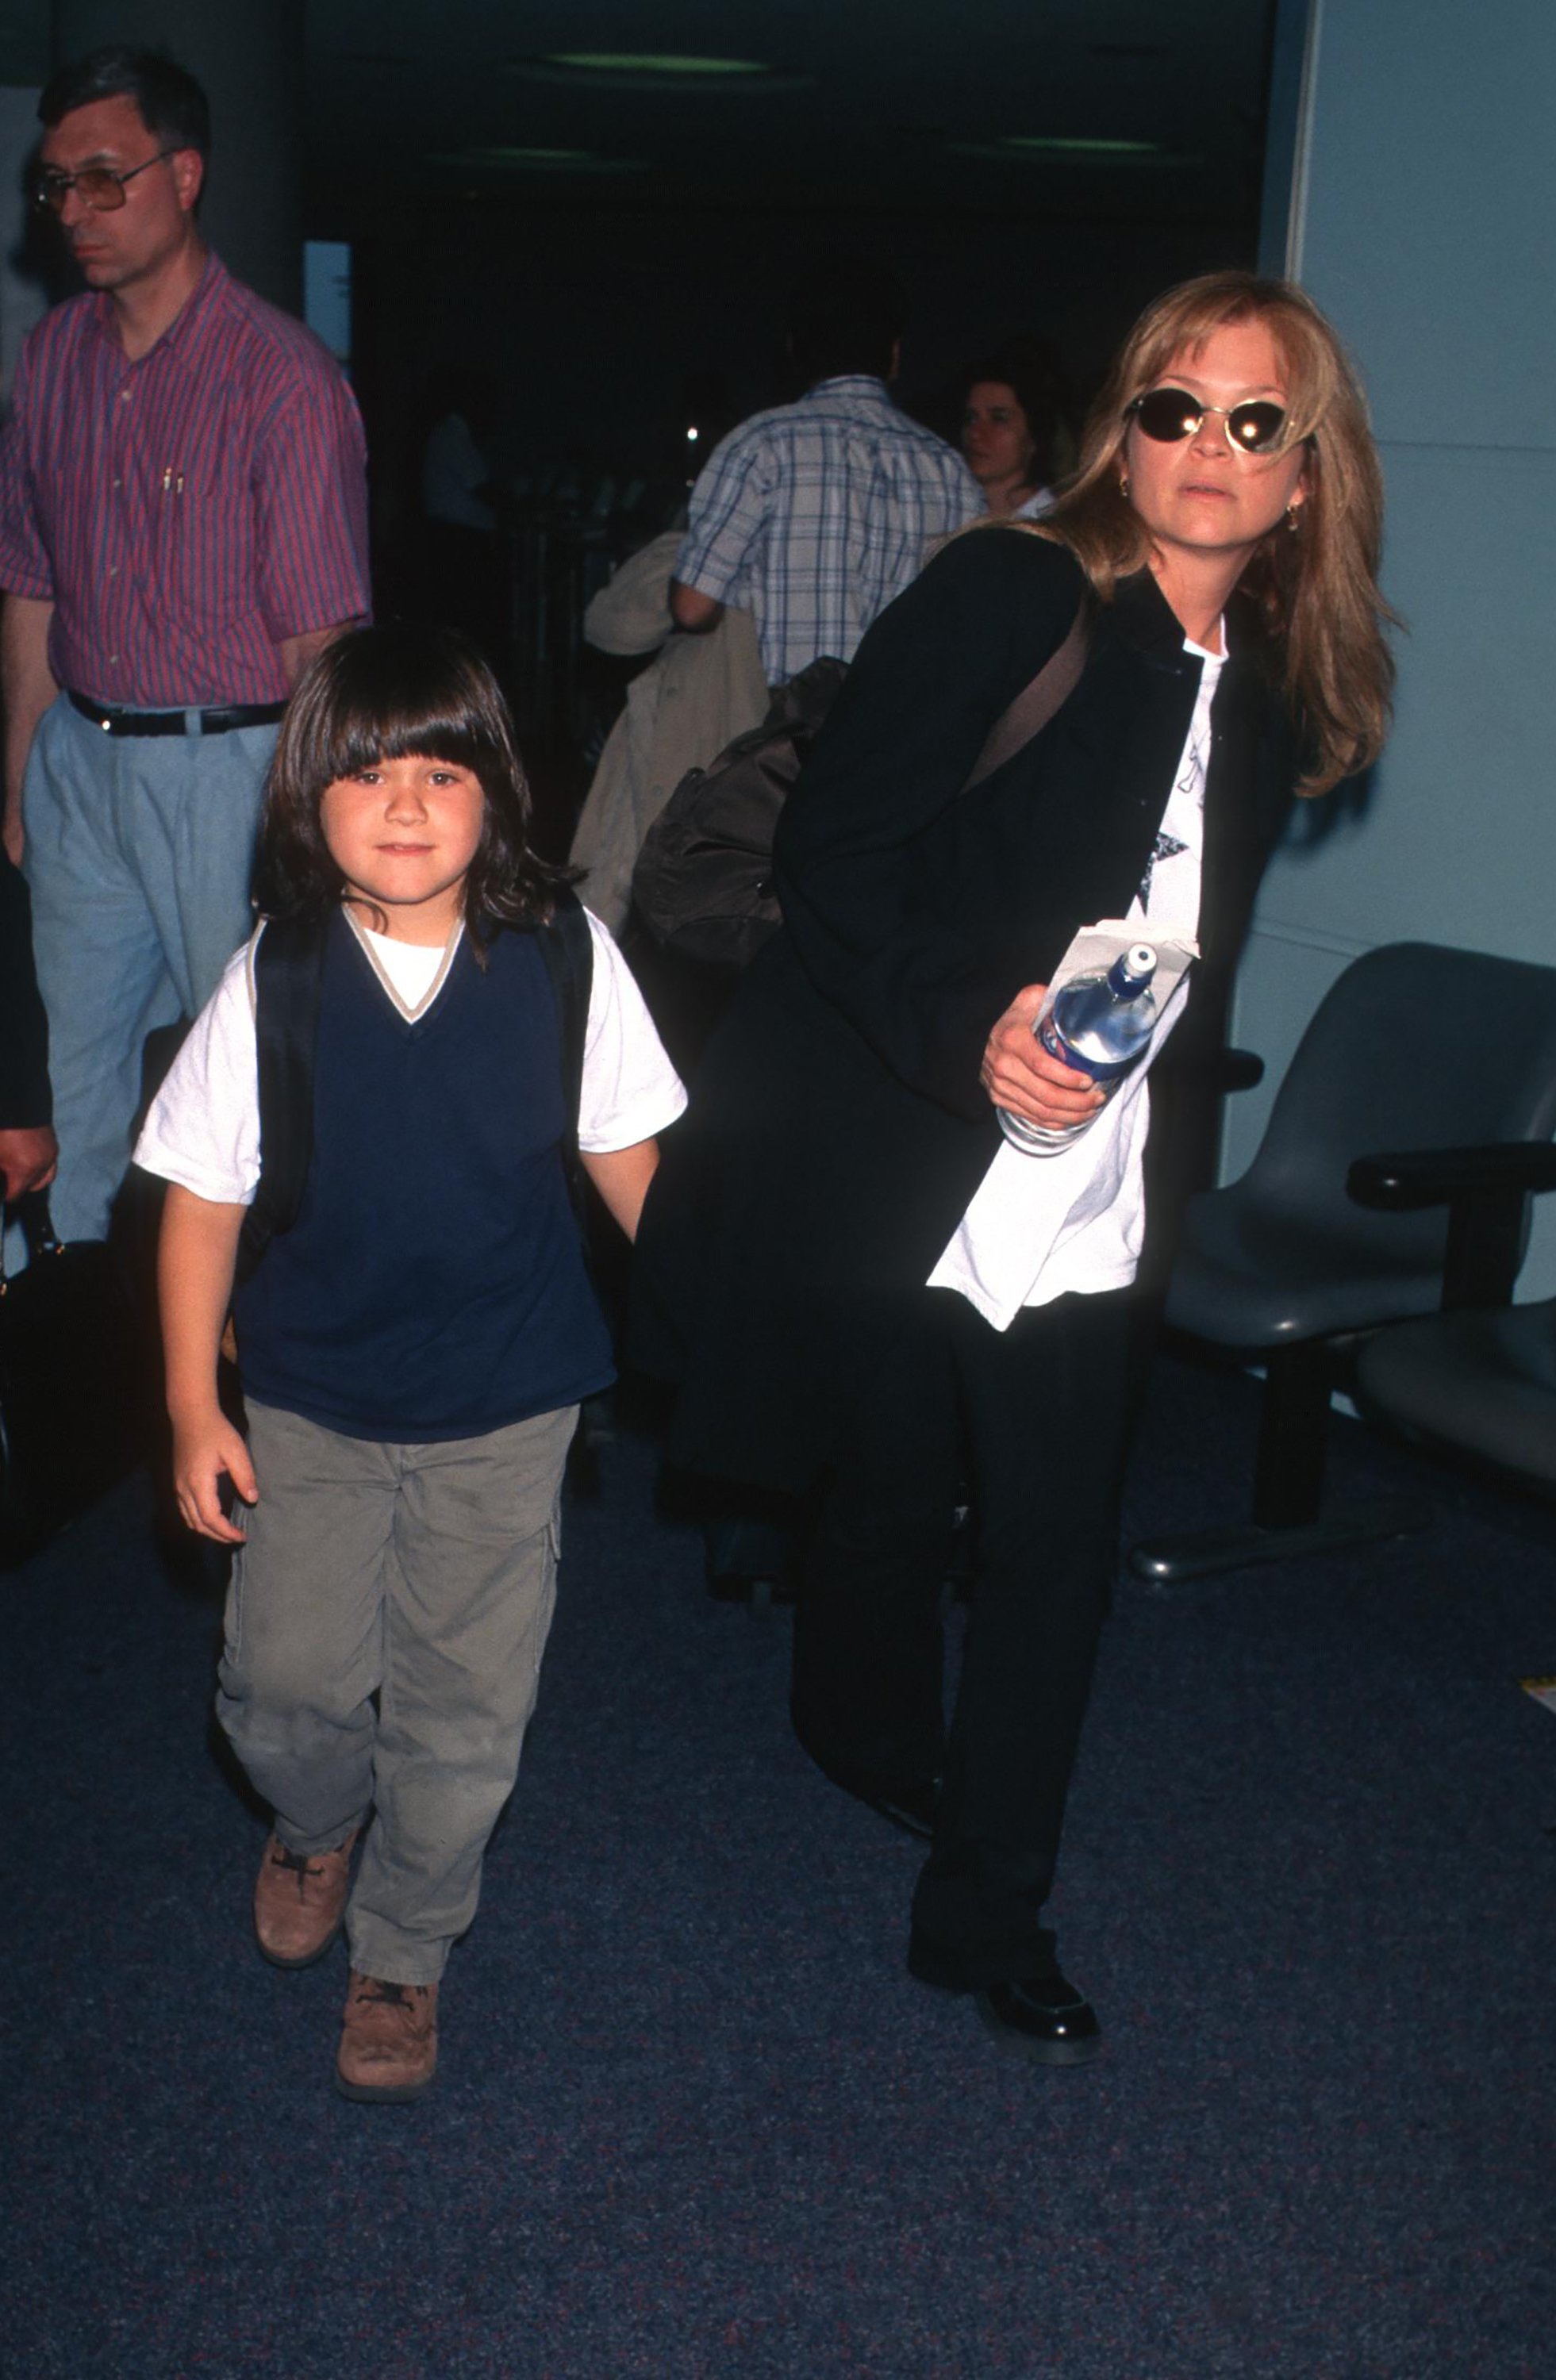 Wolfgang Van Halen and Valerie Bertinelli at the Los Angeles International Airport in Los Angeles on May 23, 1998. | Photo: Getty Images